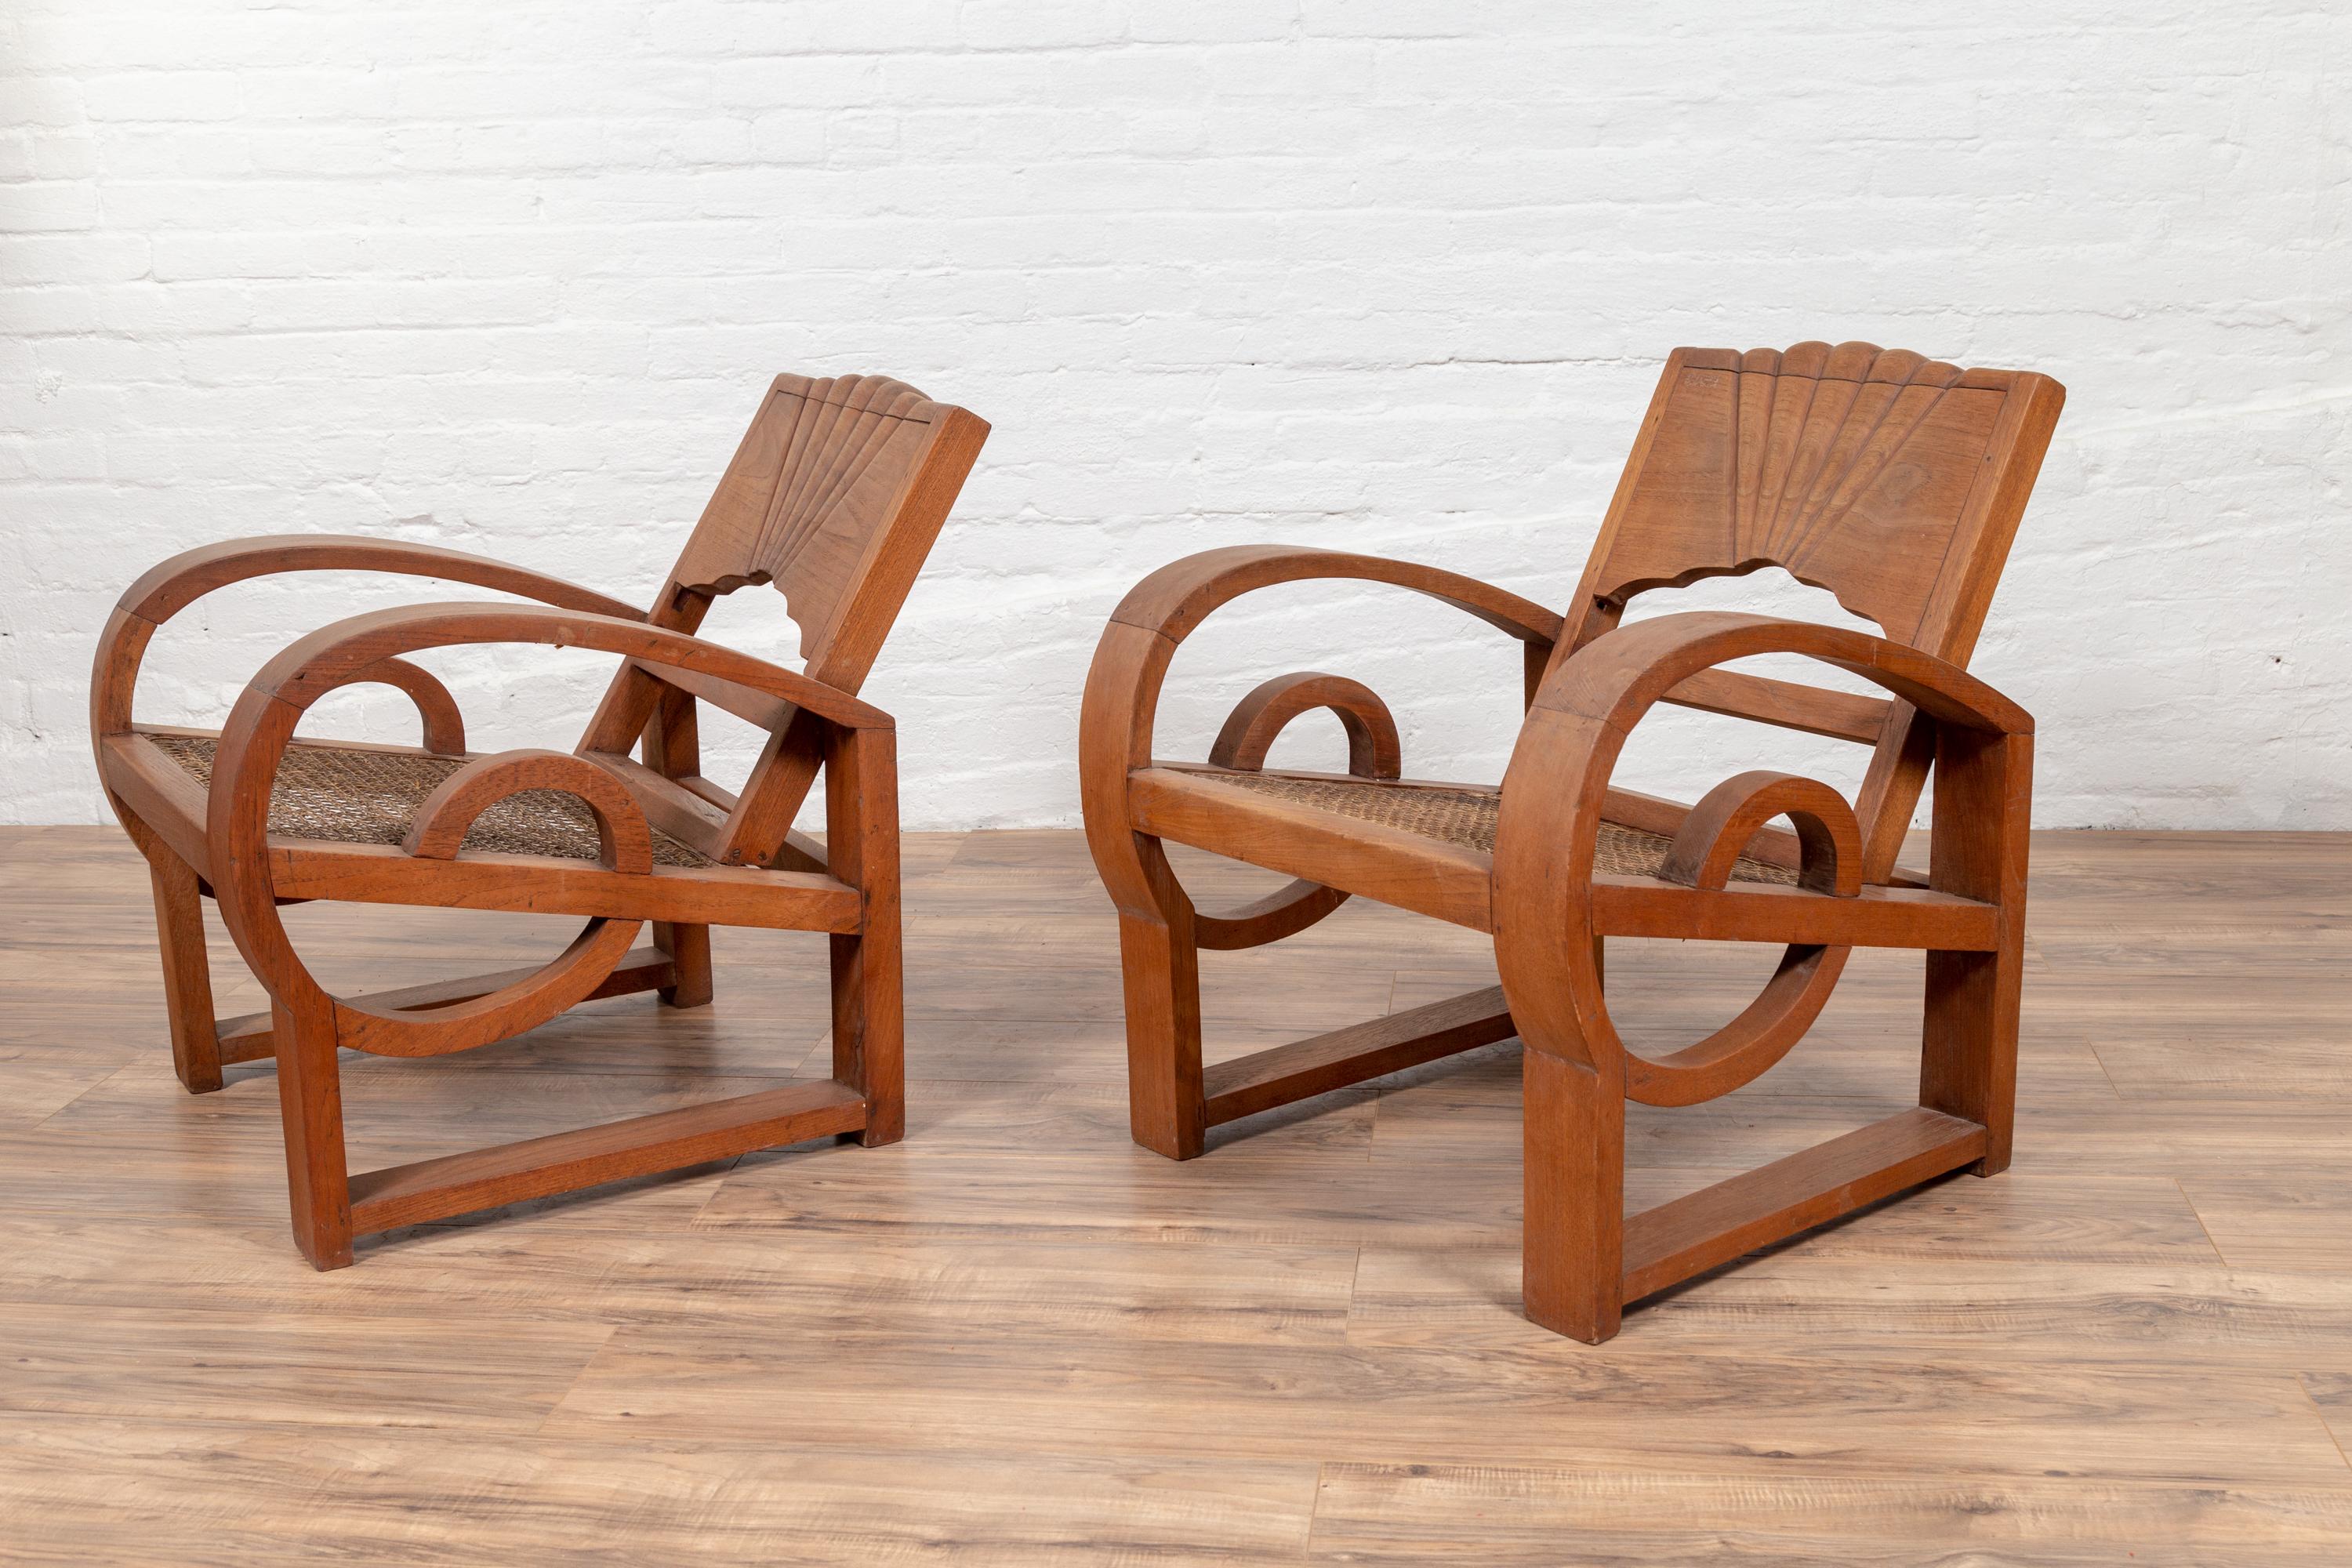 Pair of Teak Wood Country Chairs from Madura with Rattan Seats and Looping Arms 2